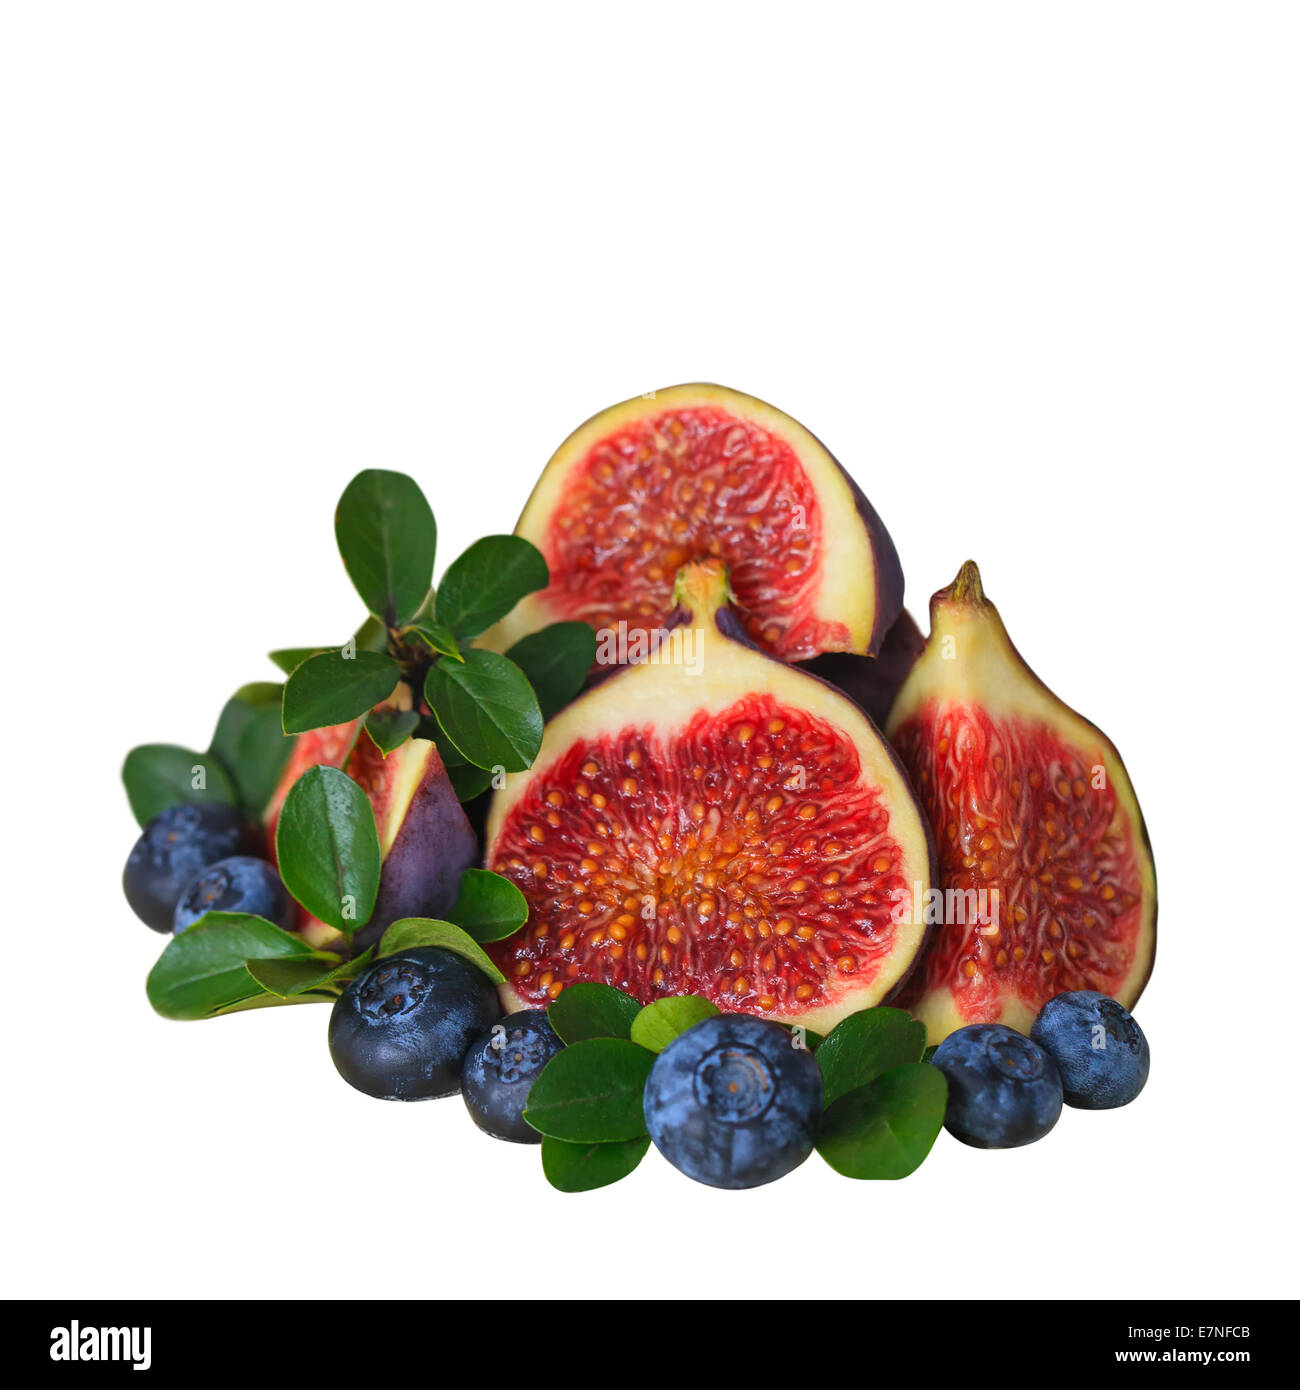 Fruit topping decoration with fig, blueberry and leaves Stock Photo